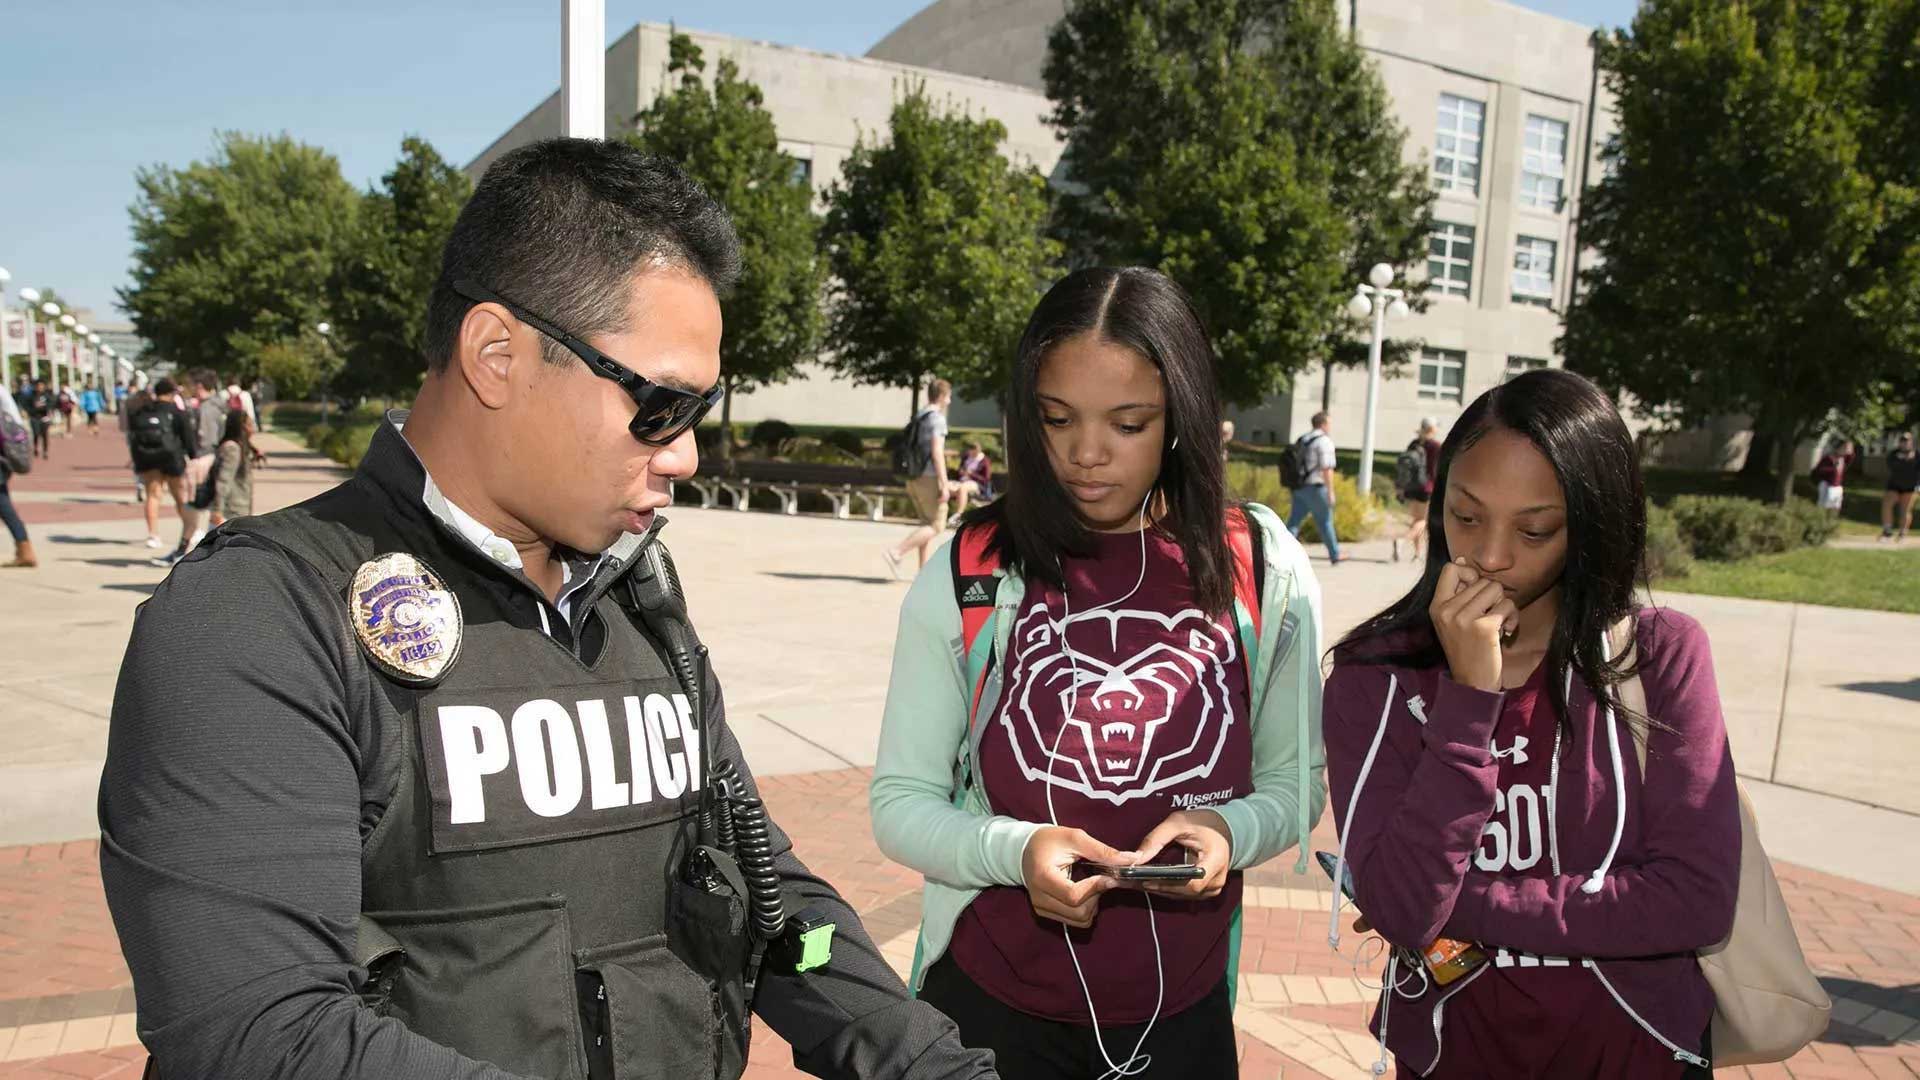 Police officer visits on campus with two students